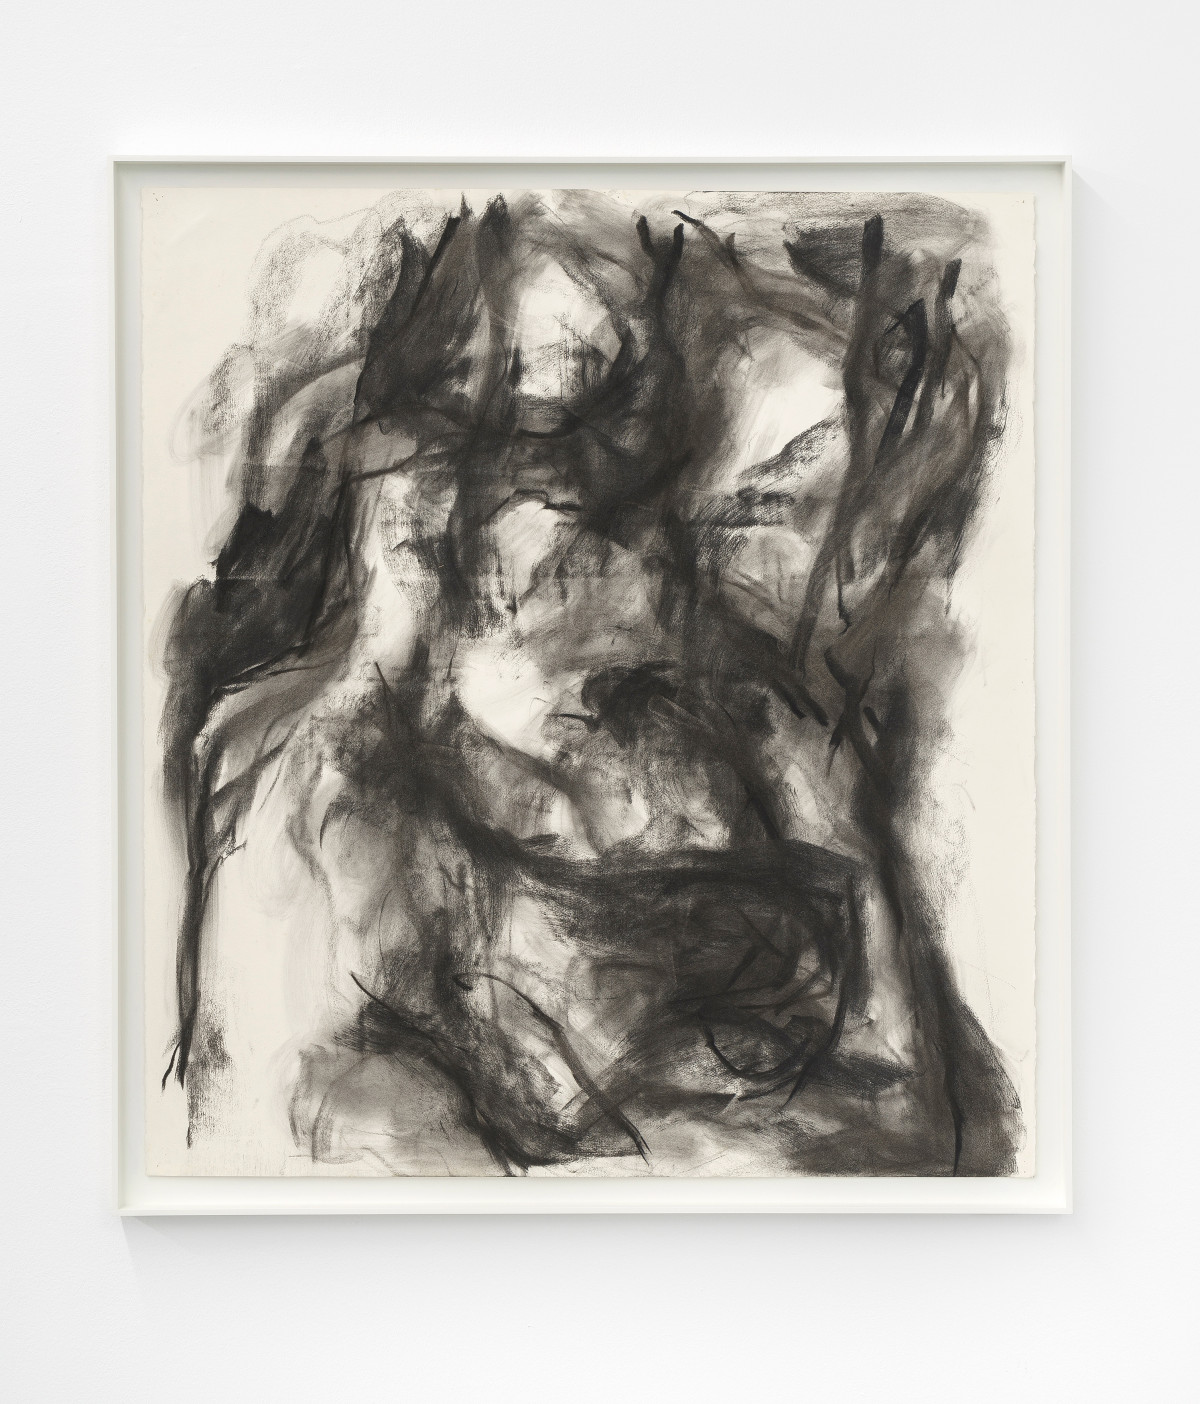 William Tucker, ‘Untitled’, 1989, Charcoal on paper